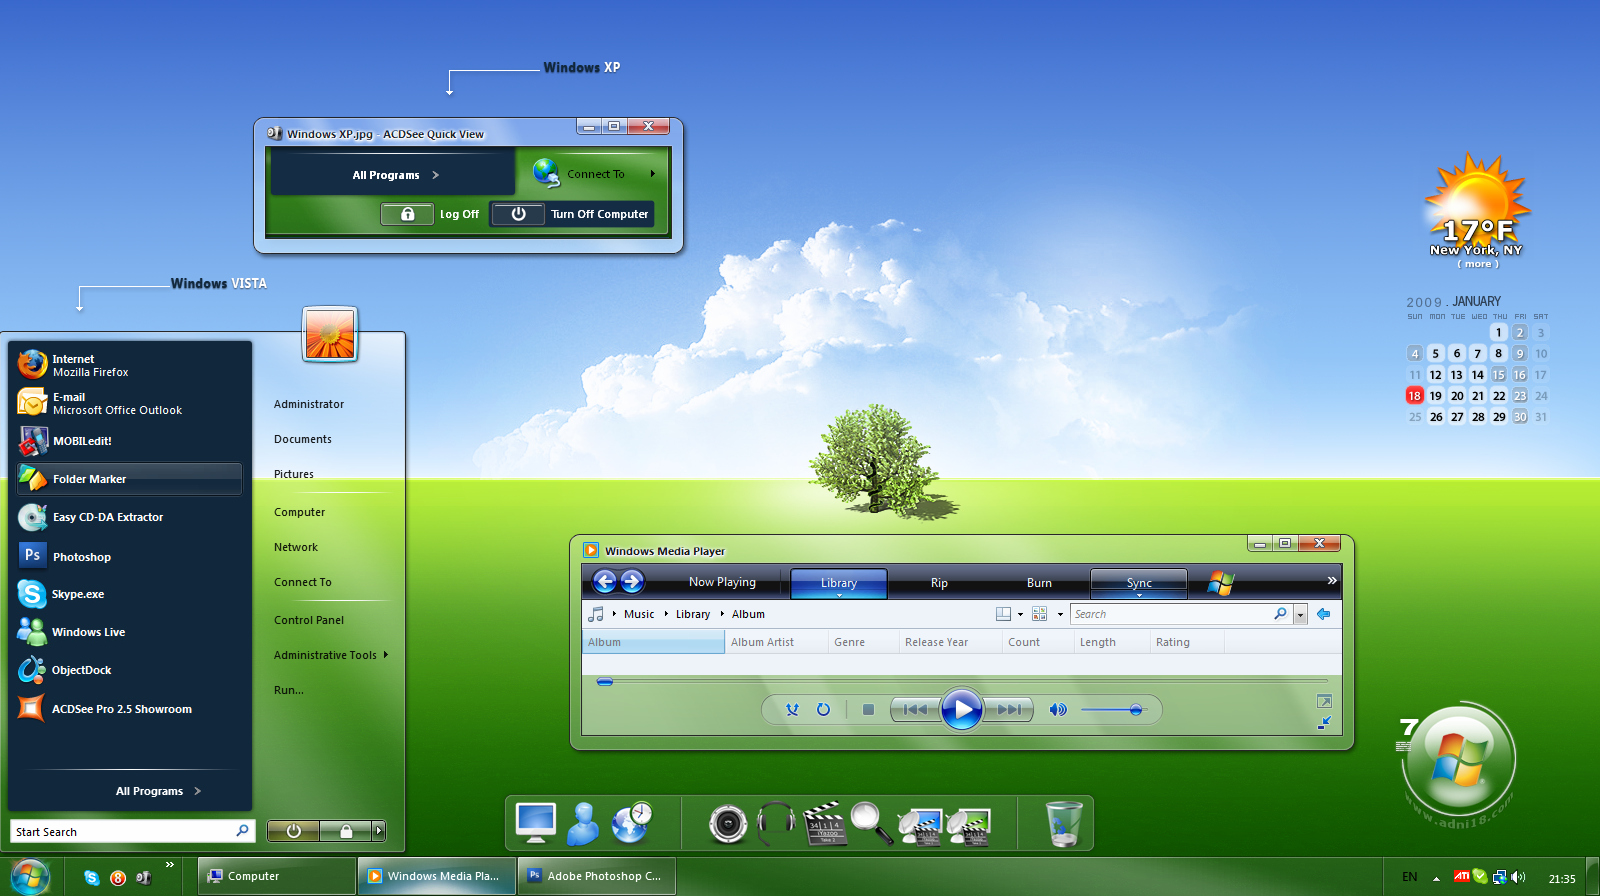 FREE DOWNLOAD - PC SOFTWARE - WINDOW BLINDS 7.3 FULL VERSION